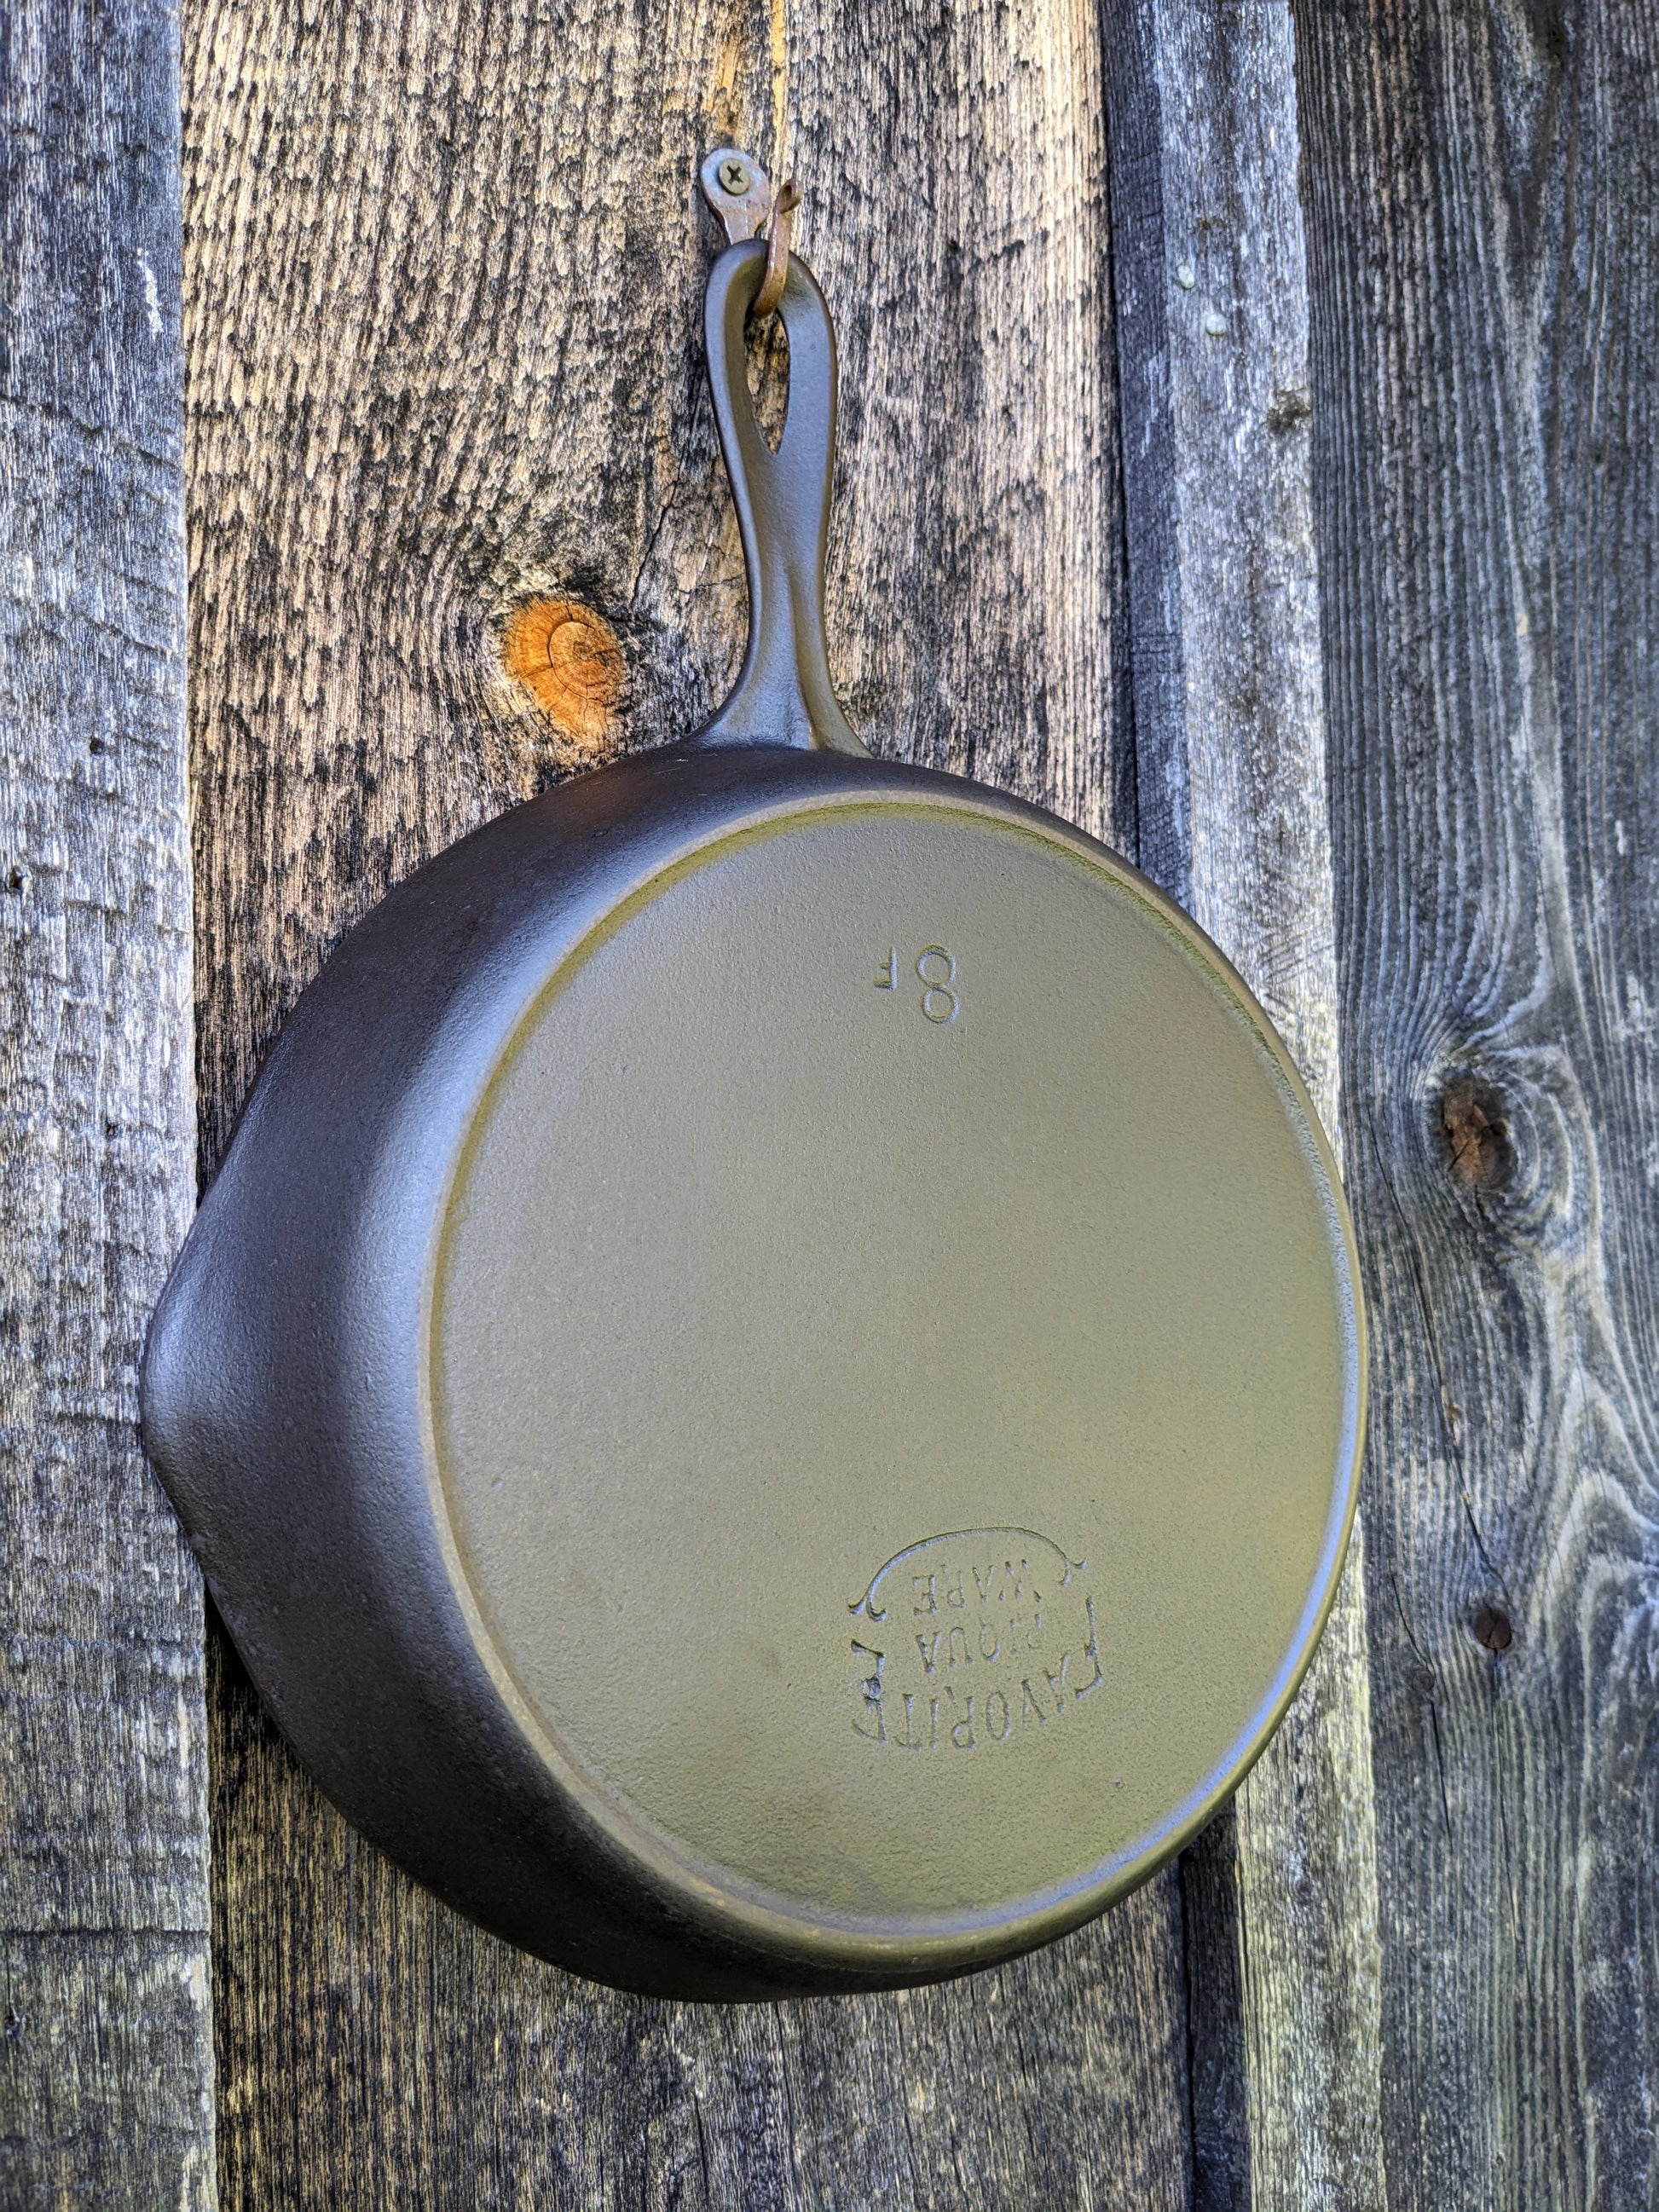 WAGNER WARE SIDNEY -O- SMOOTH BOTTOM #8 CAST IRON SKILLET 1058E